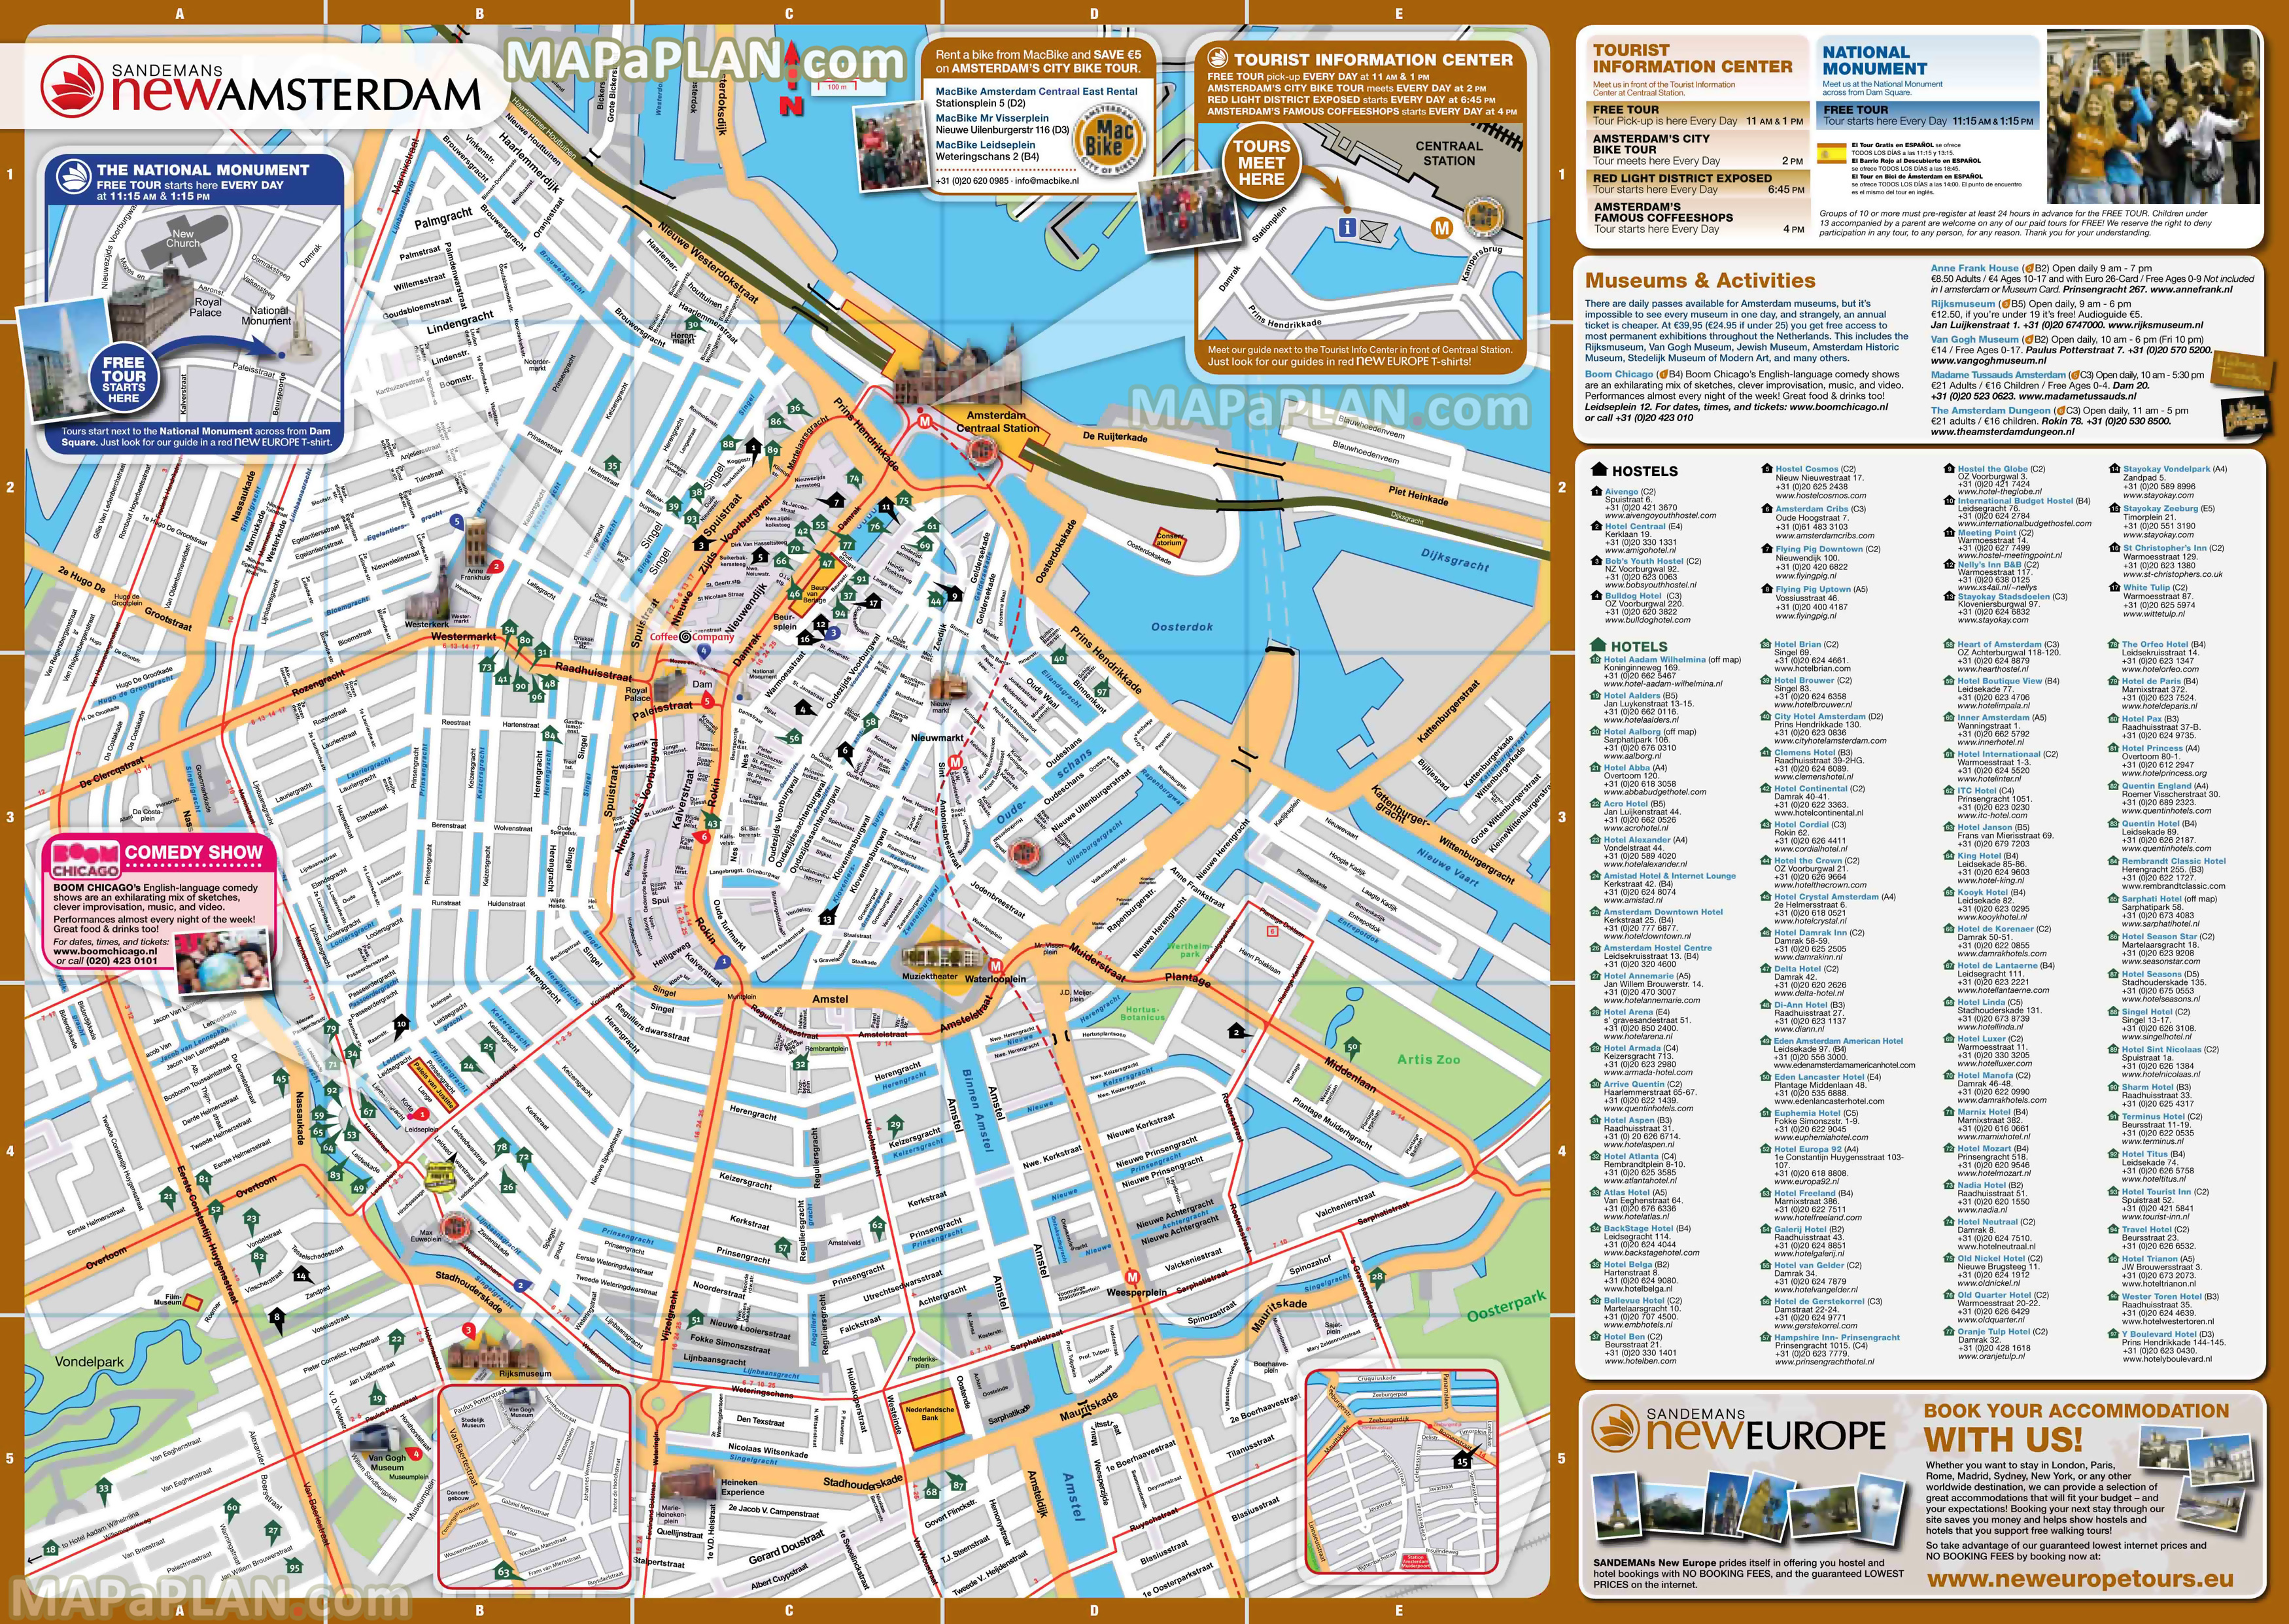 Most popular hotels affordable hostels Amsterdam top tourist attractions map